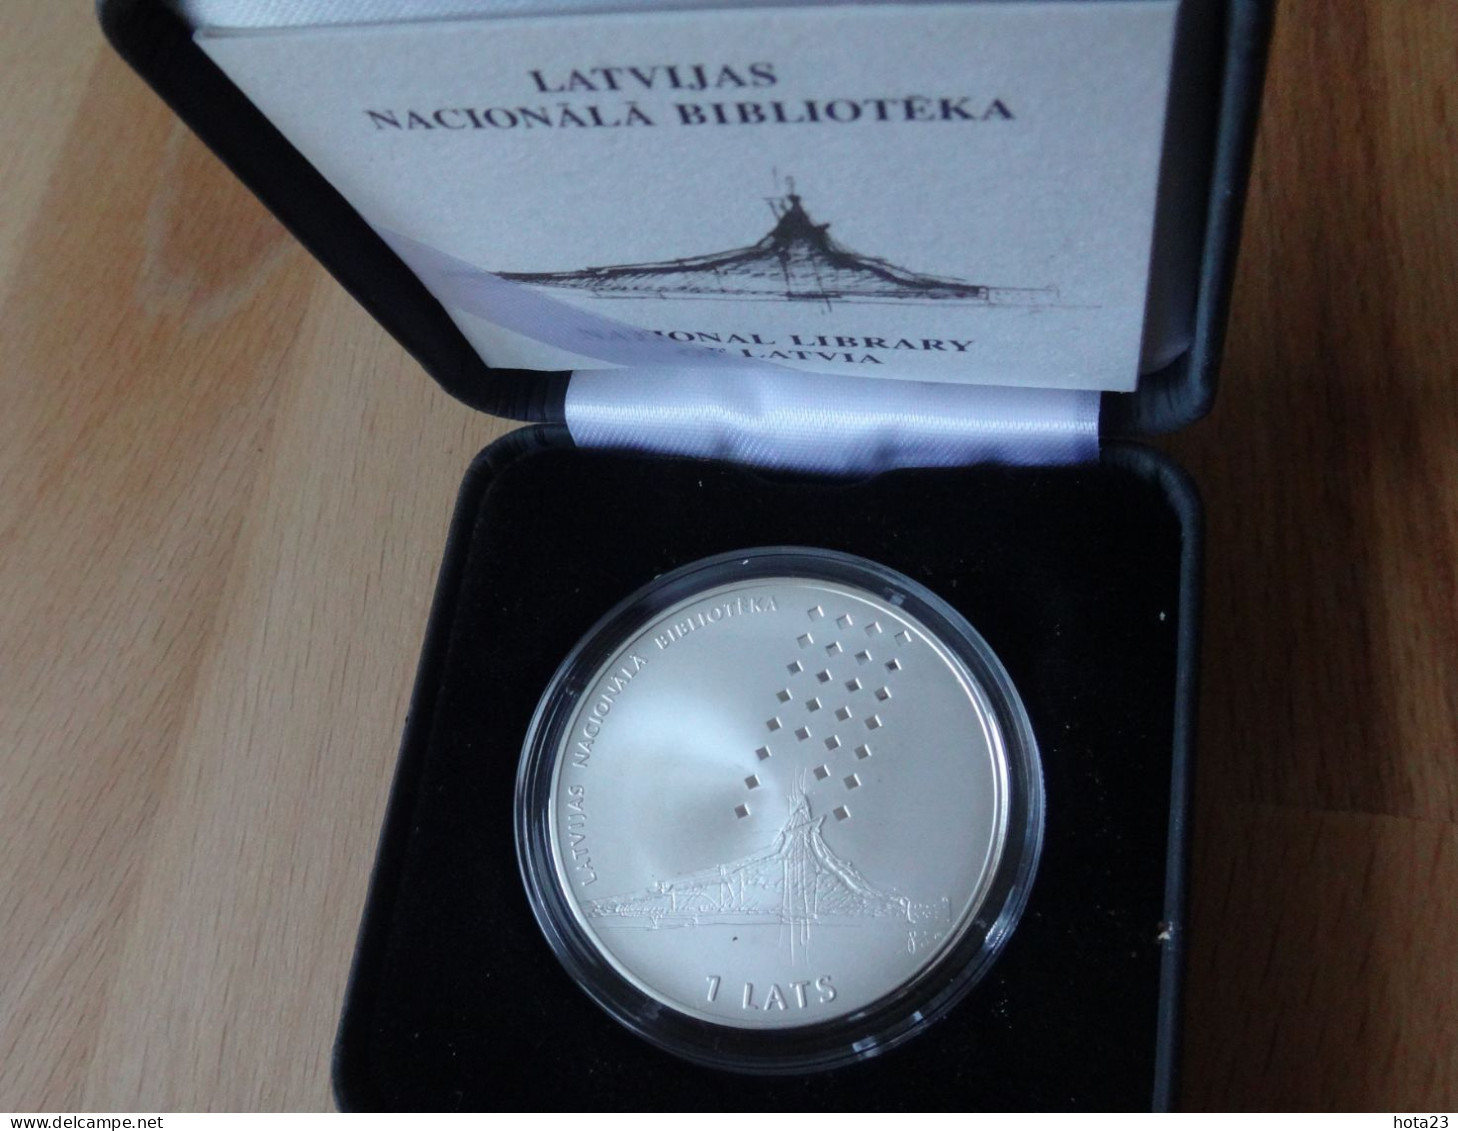 (!) LATVIA ,Lettland , Lettonia SILVER COIN 1 LATS National Library PROOF 2002 Y Modern Architekture - Latvia